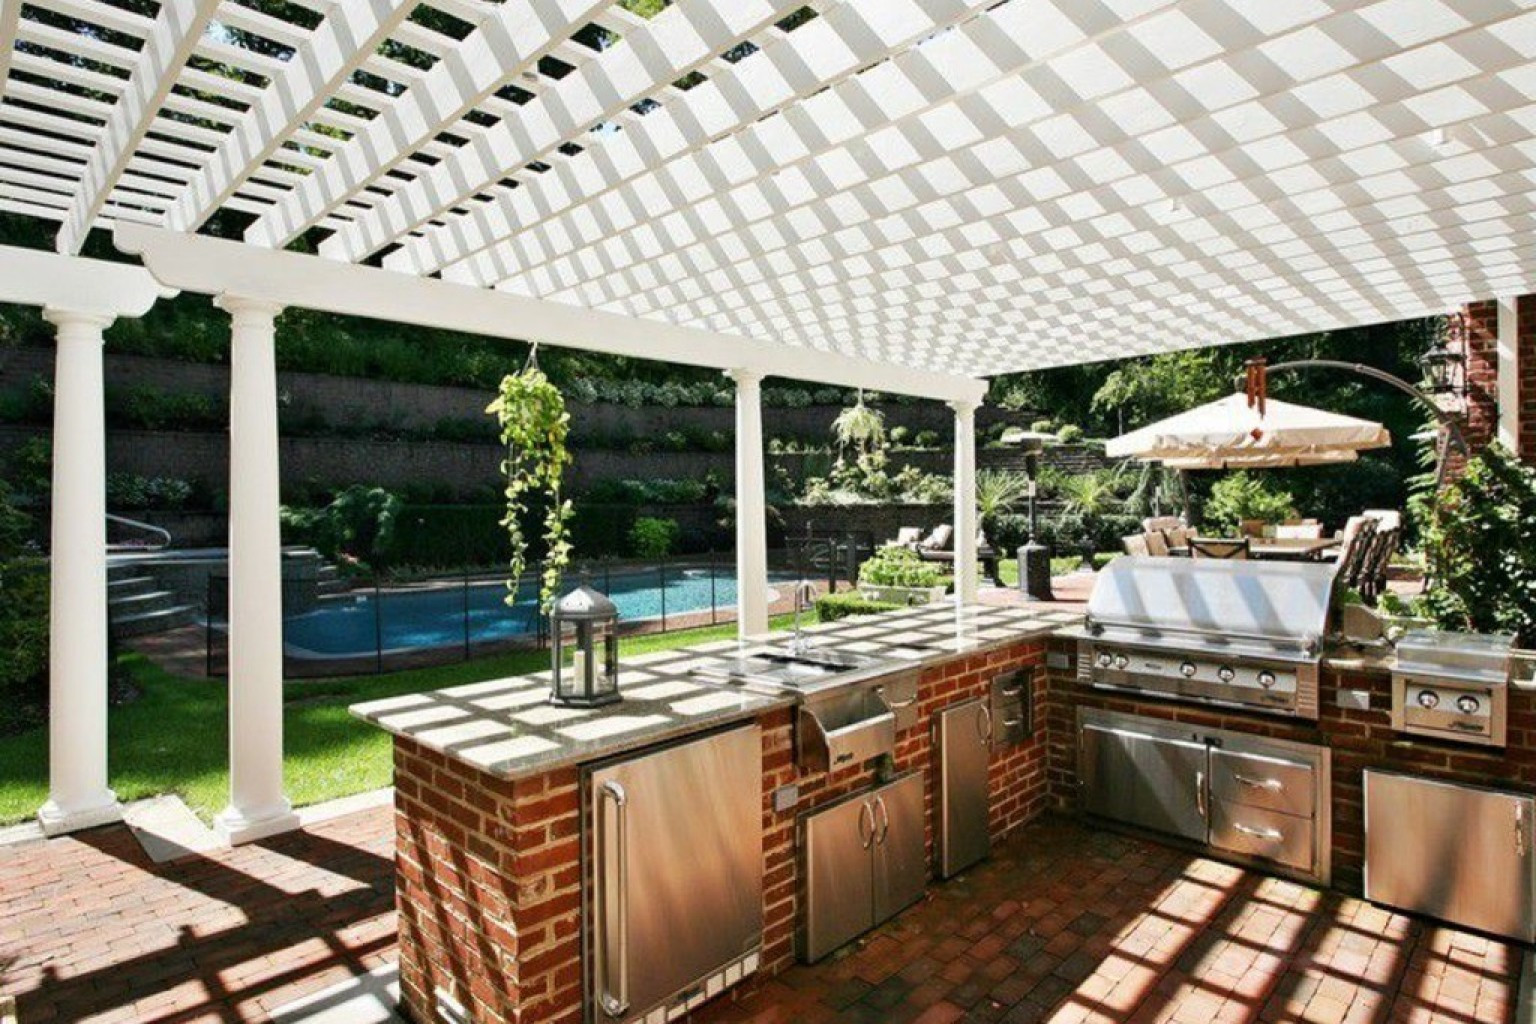 Outdoor Kitchen Images
 14 Incredible Outdoor Kitchens That Go Way Beyond Grills